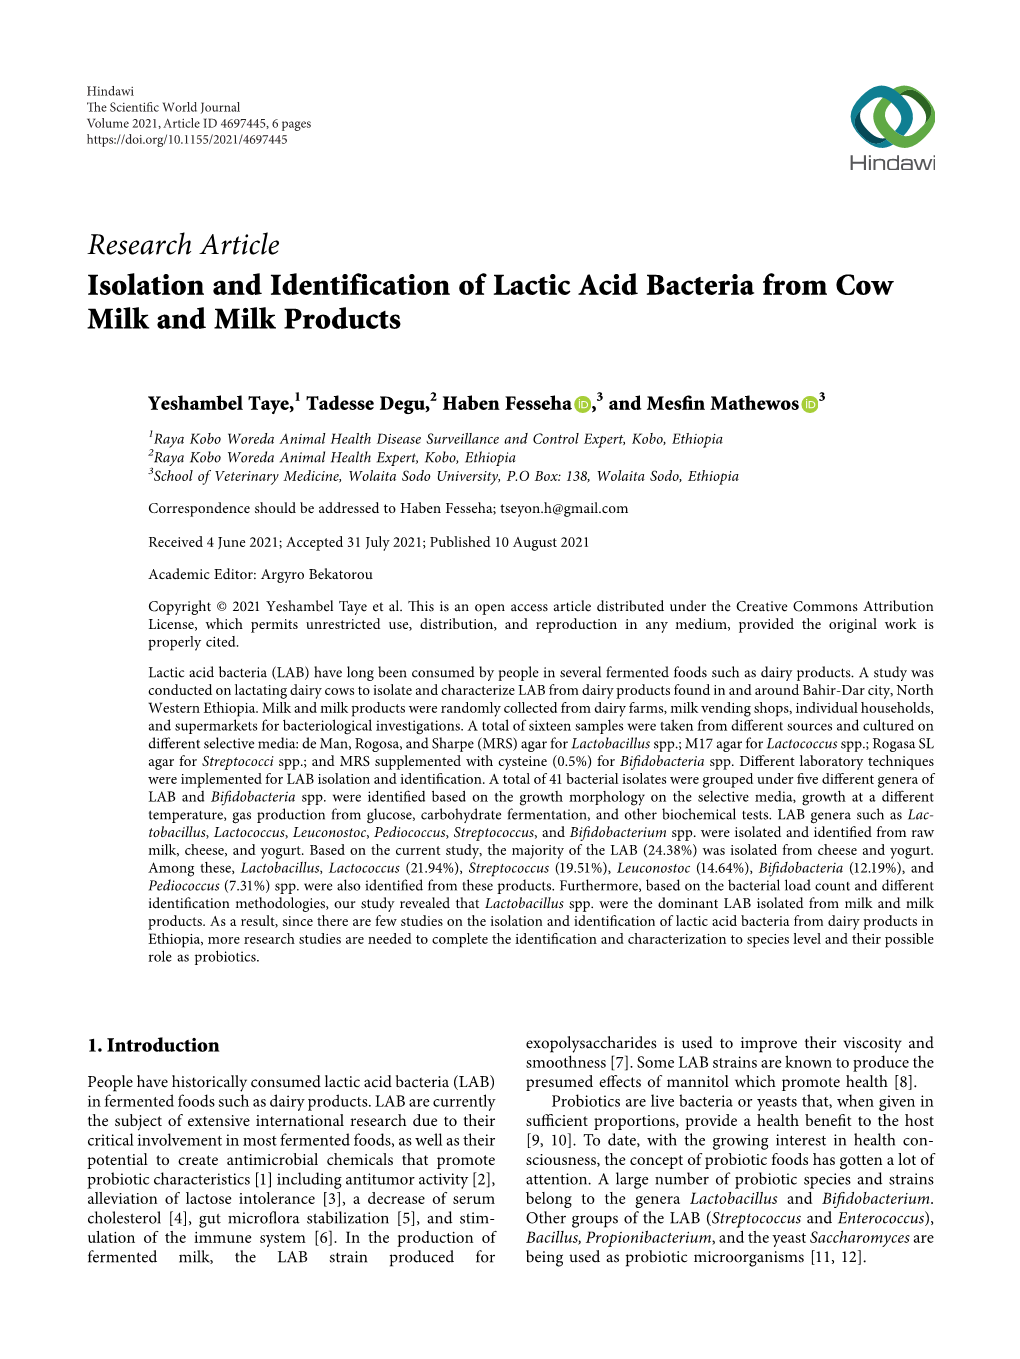 Research Article Isolation and Identification of Lactic Acid Bacteria from Cow Milk and Milk Products